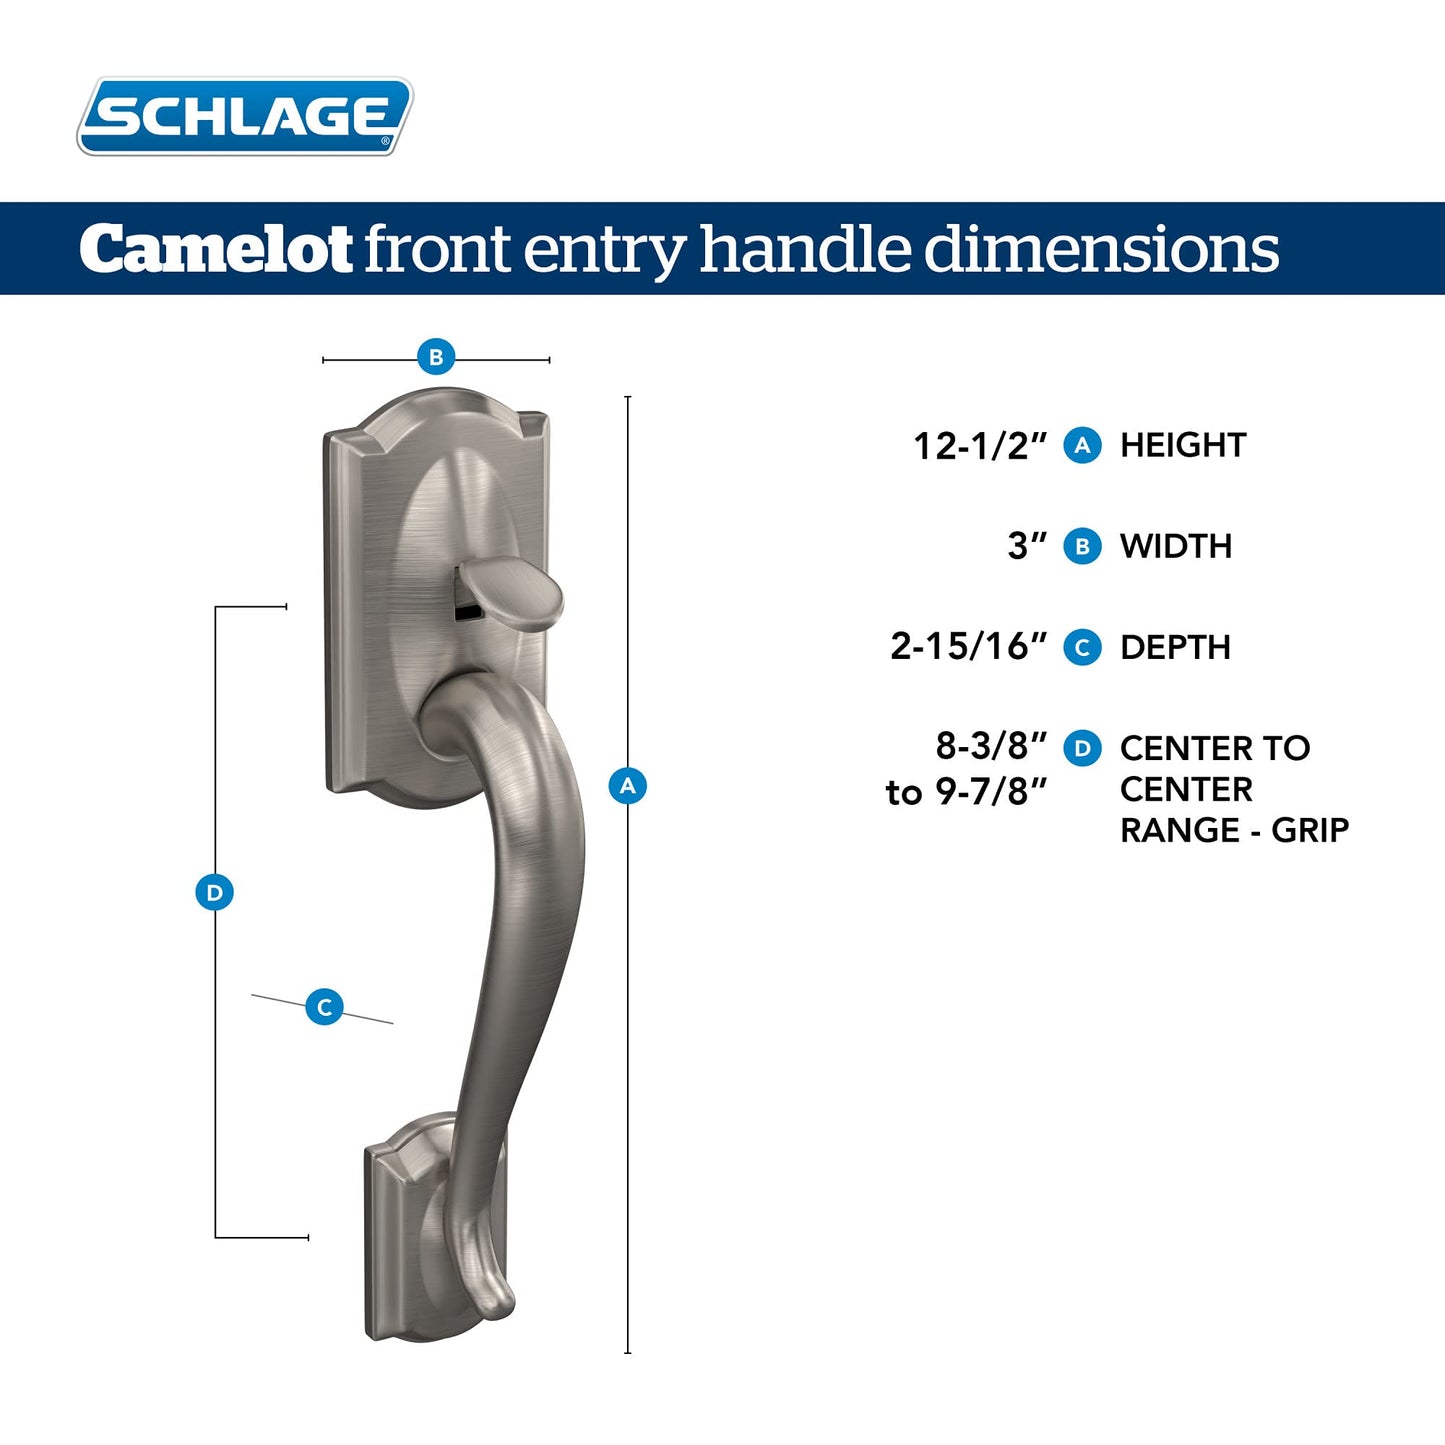 Schlage LOCK FE285 CAM 716 ACC RH Camelot Front Entry Handleset with Right-Handed Accent Lever Lower Half Grip, Standard Interior Trim, Aged Bronze